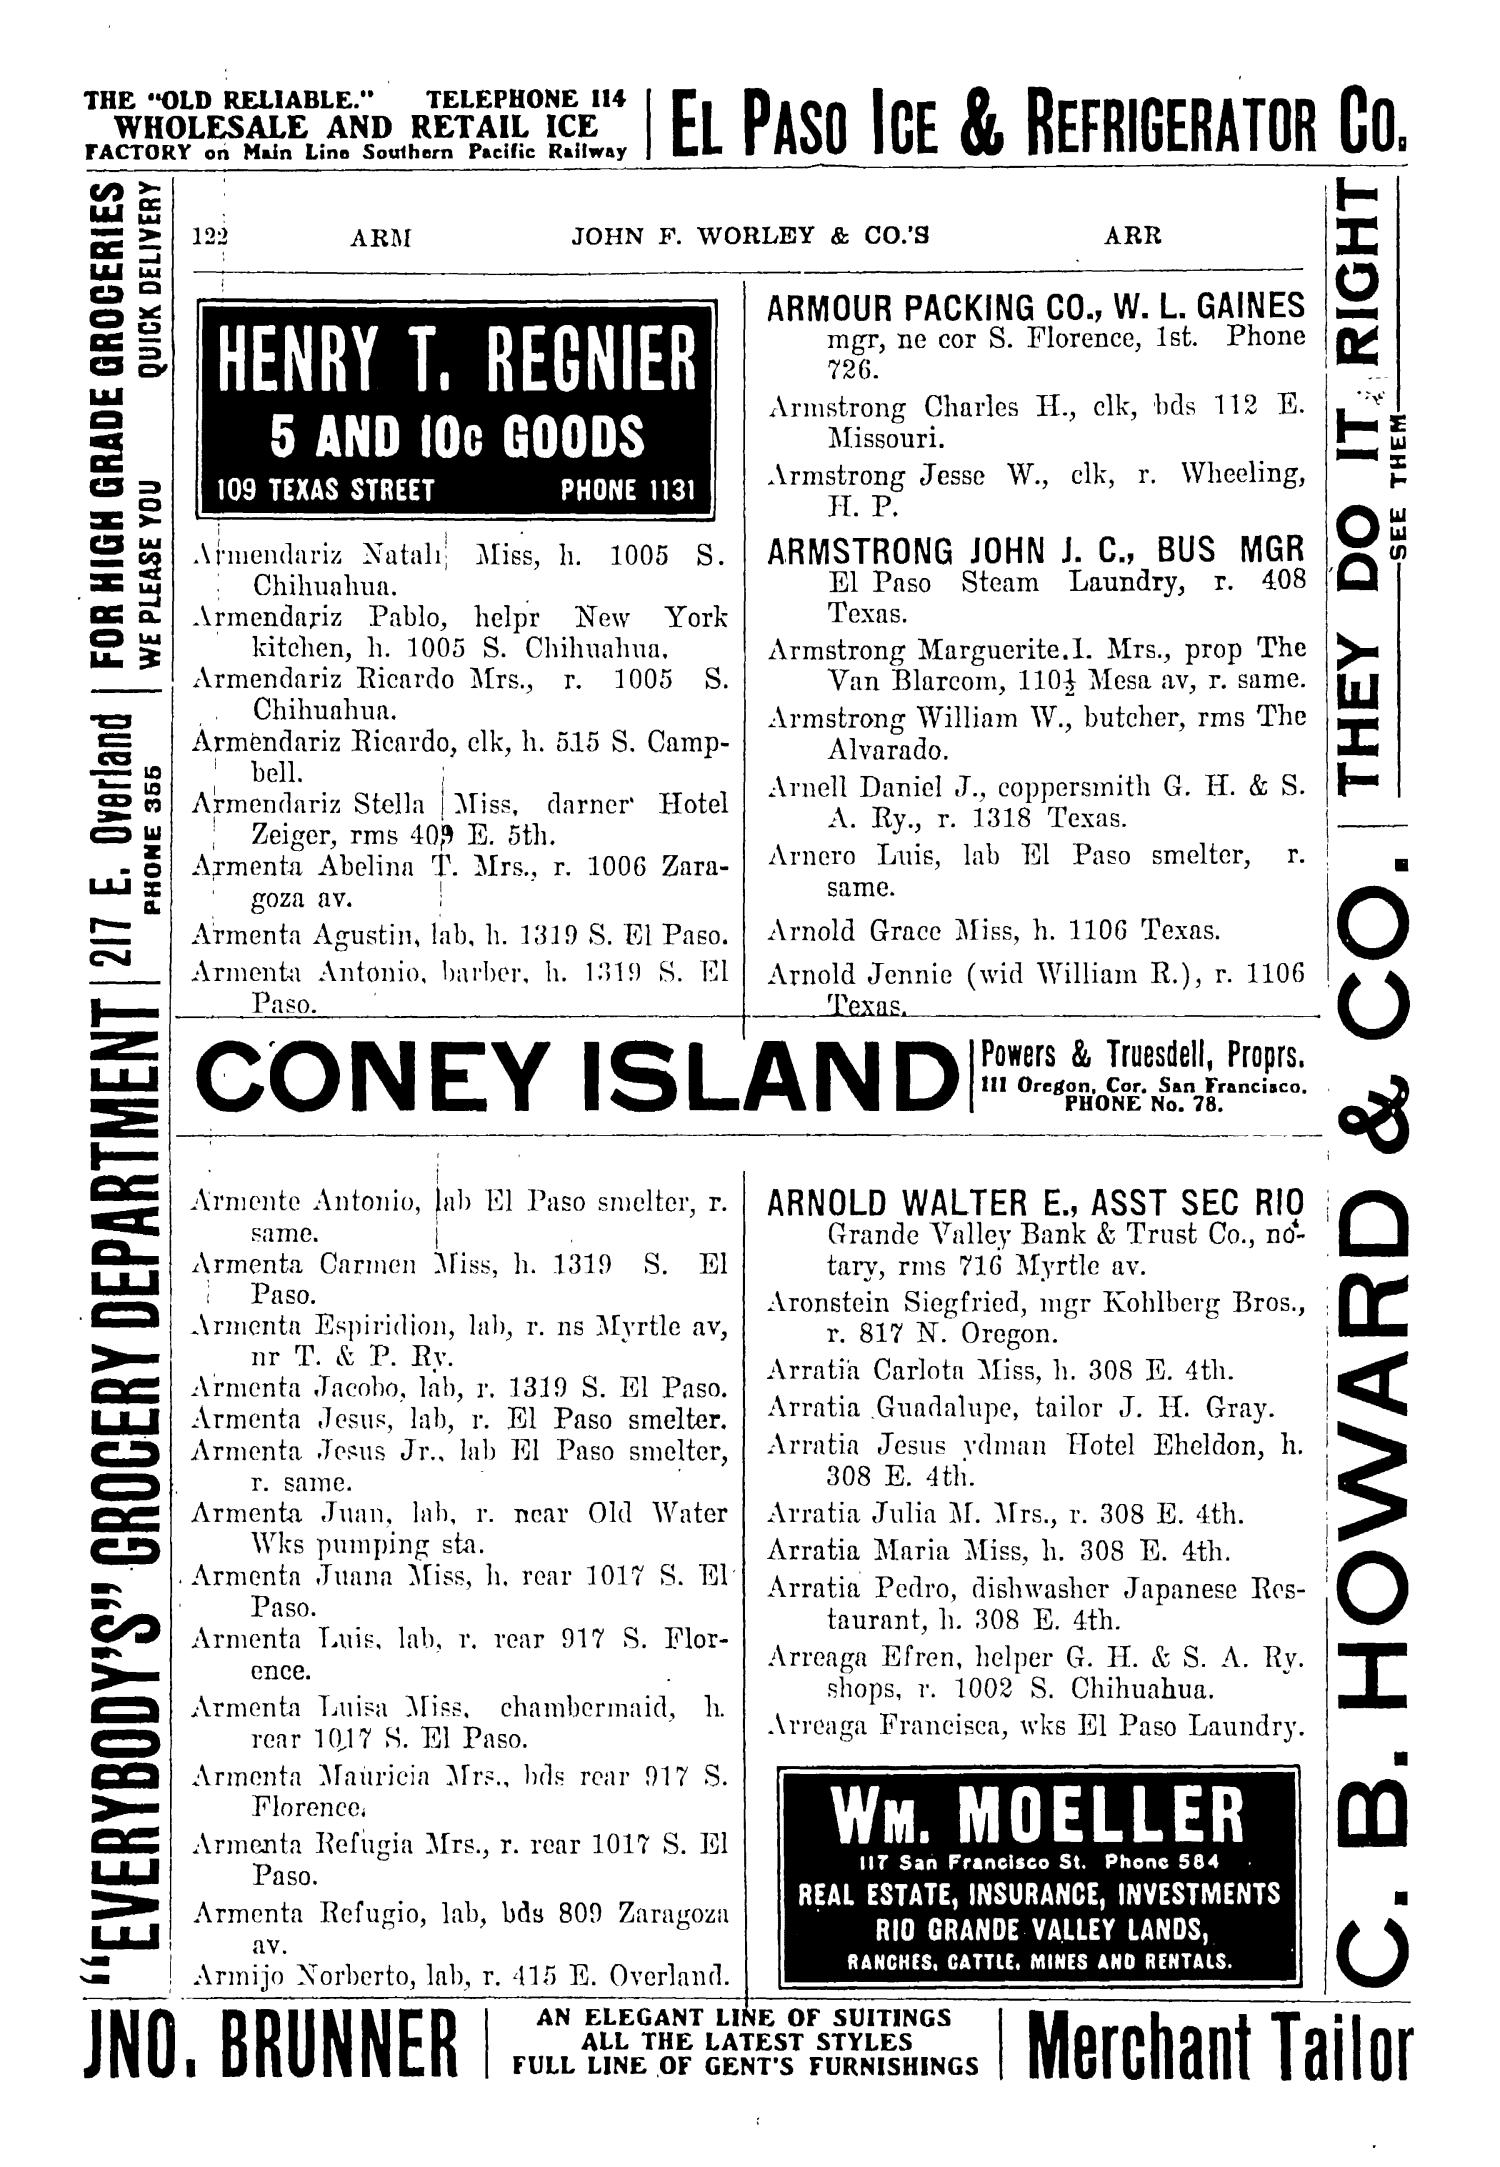 John F. Worley & Co.'s El Paso Directory for 1906
                                                
                                                    122
                                                